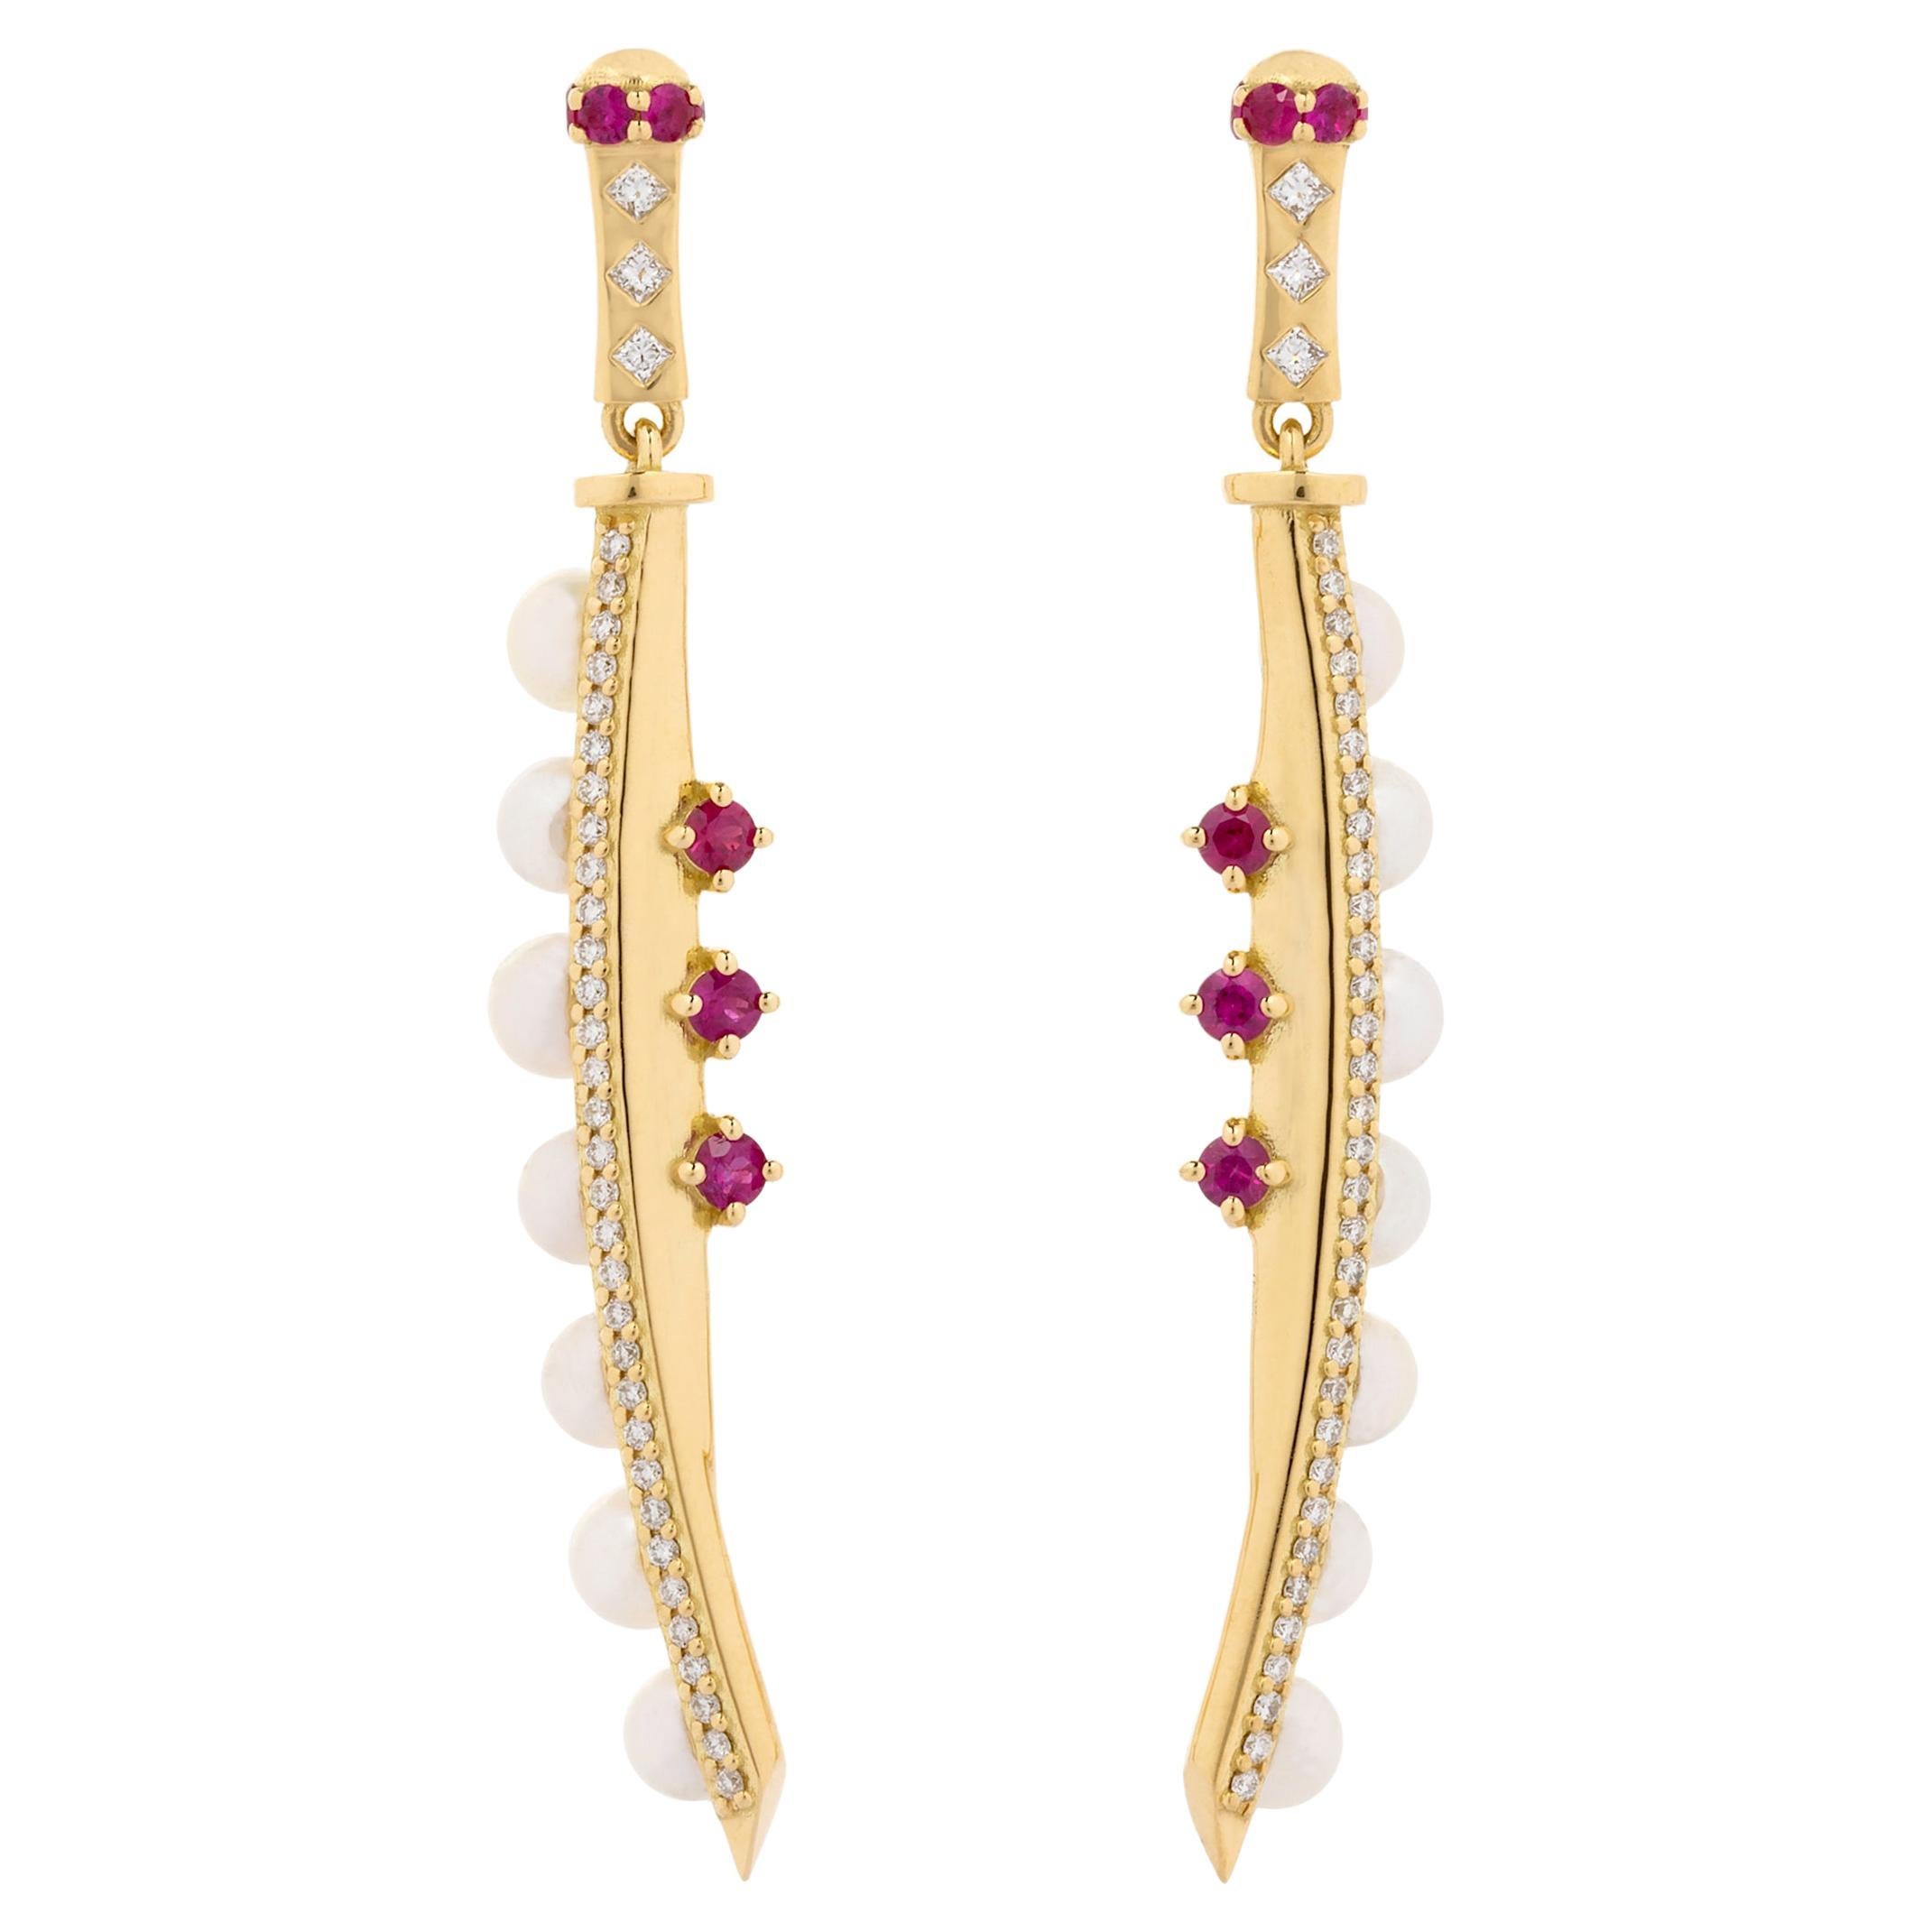 Onna Musha Earrings in 18 Karat Yellow Gold with Diamonds, Rubies And Pearls